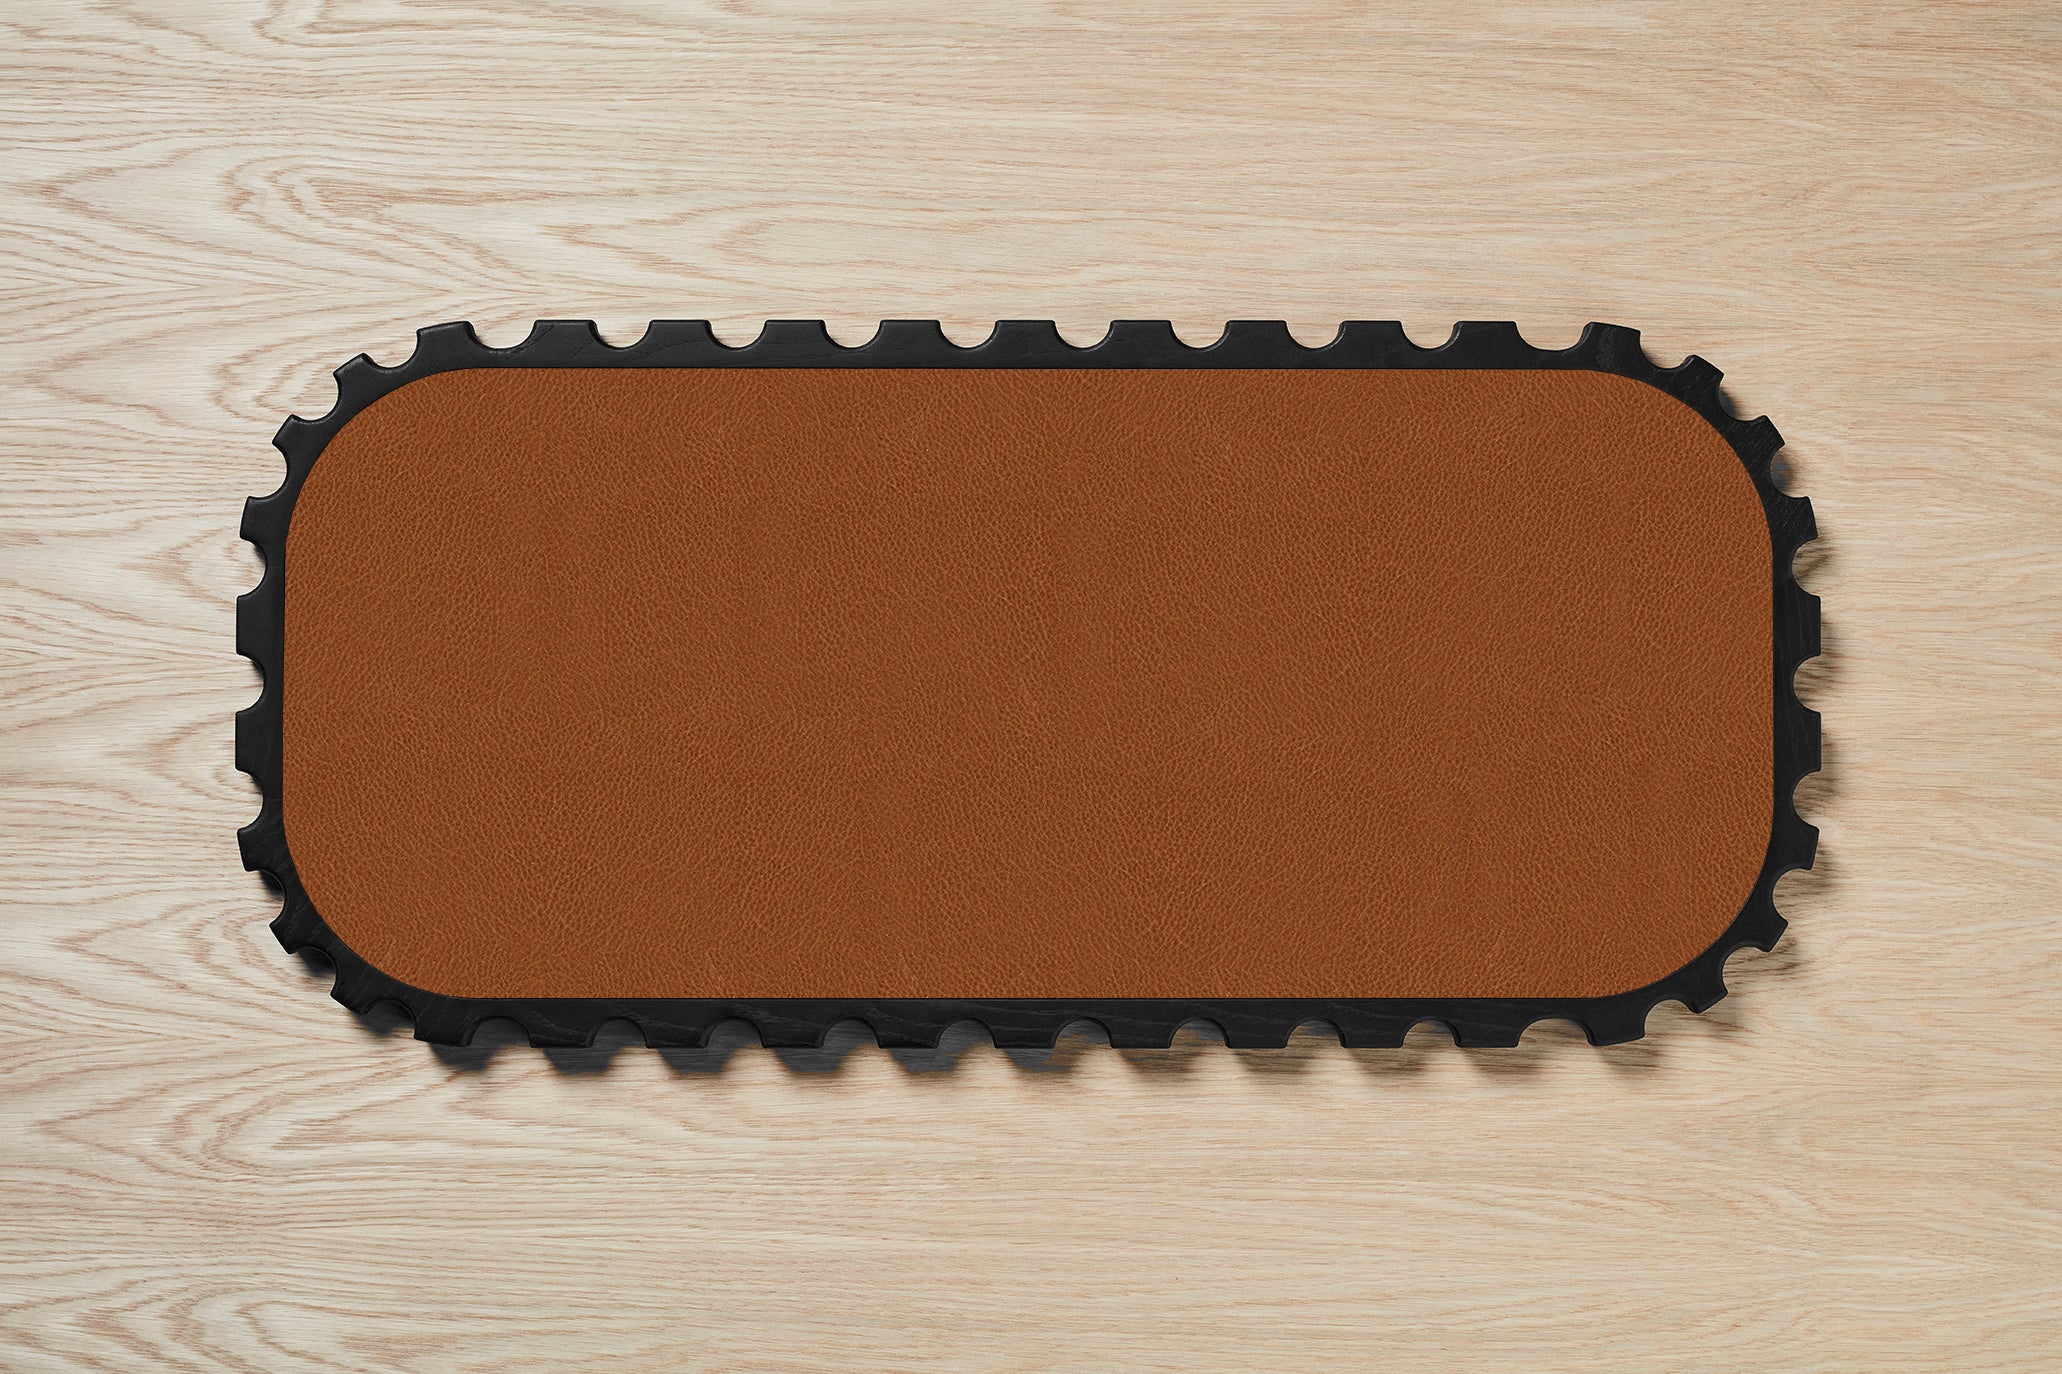 Flow Scalloped Tan Faux Leather Tray - Zuster Furniture